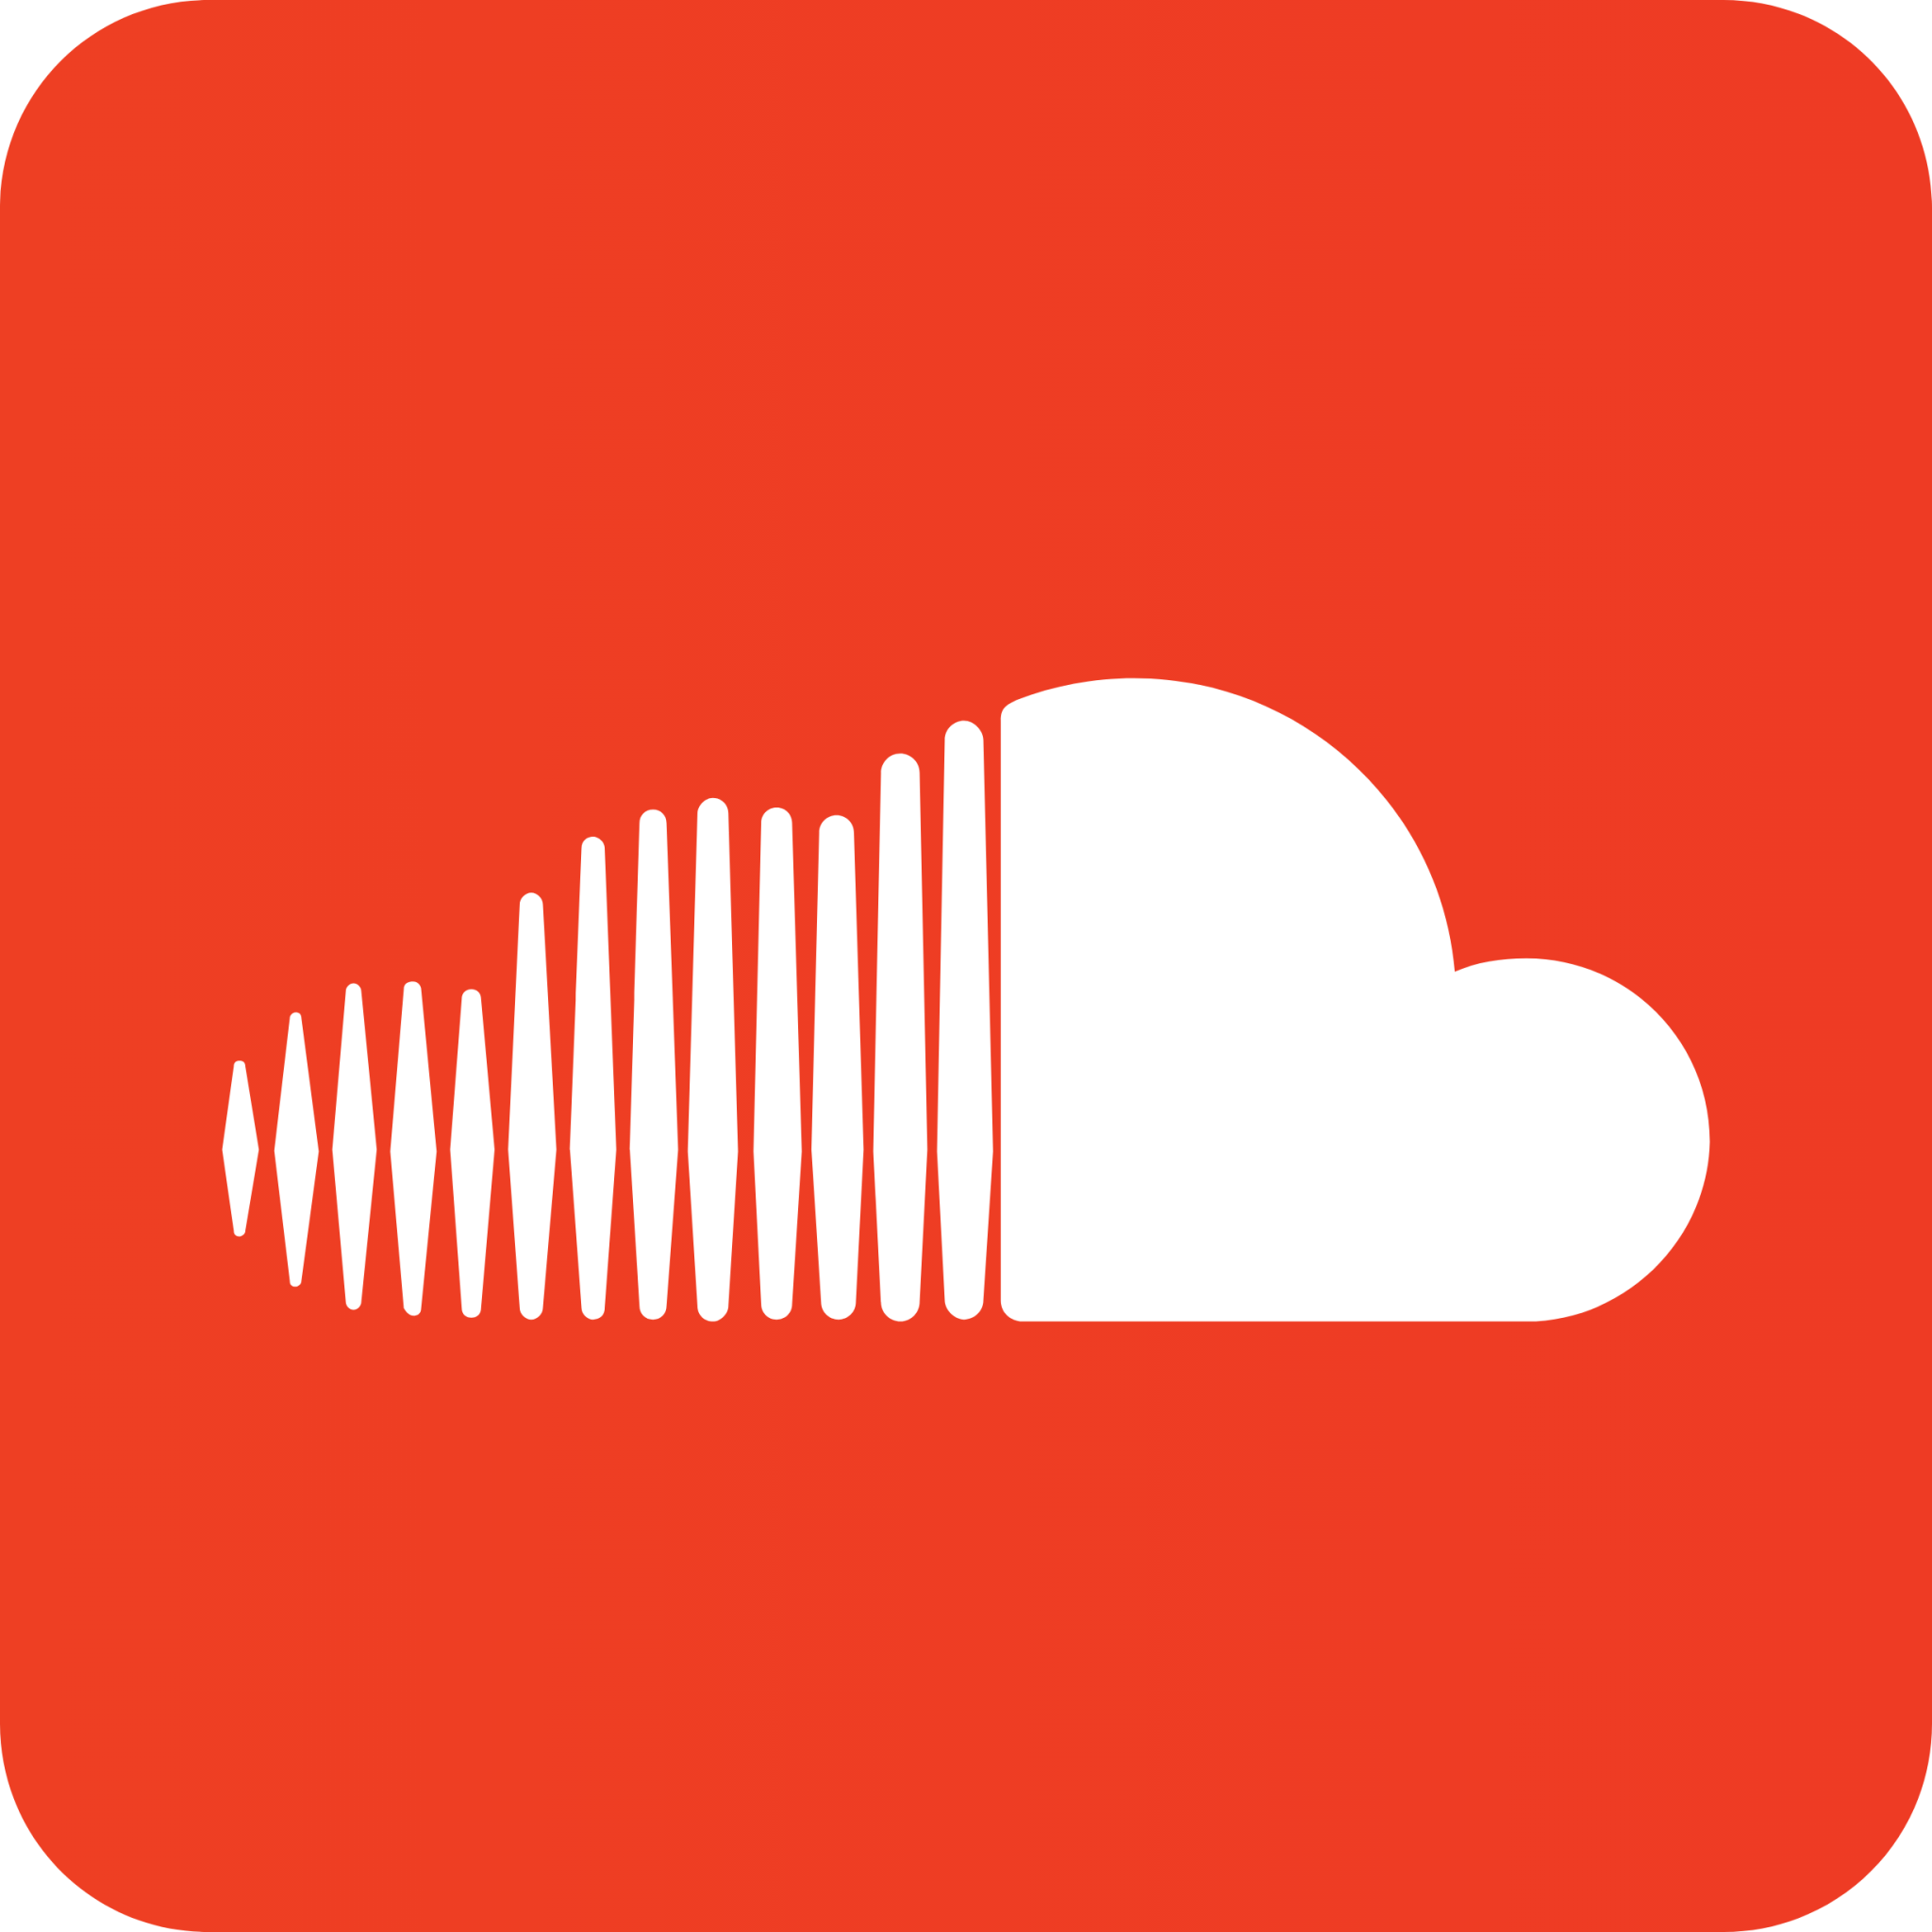 soundcloud rounded icon